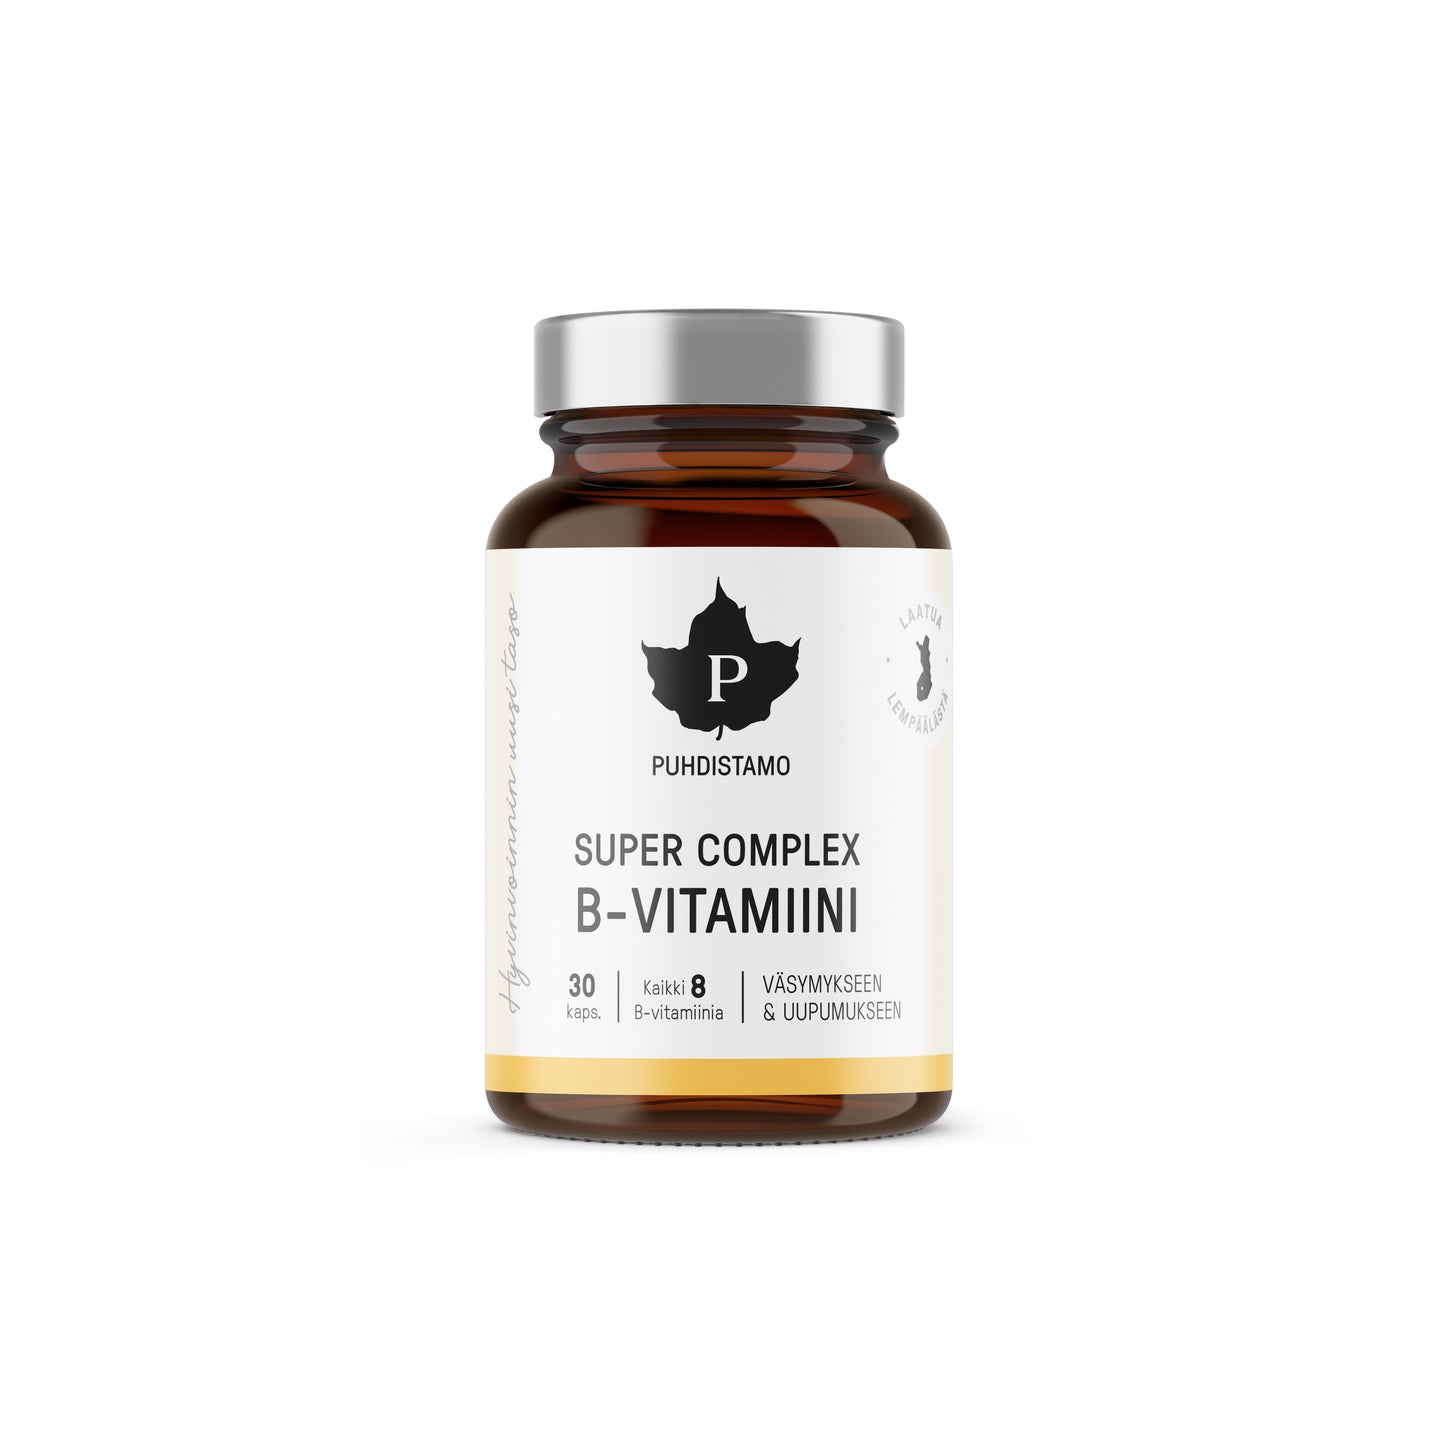 A strong, unique combination of highly absorbable active forms of vitamins B